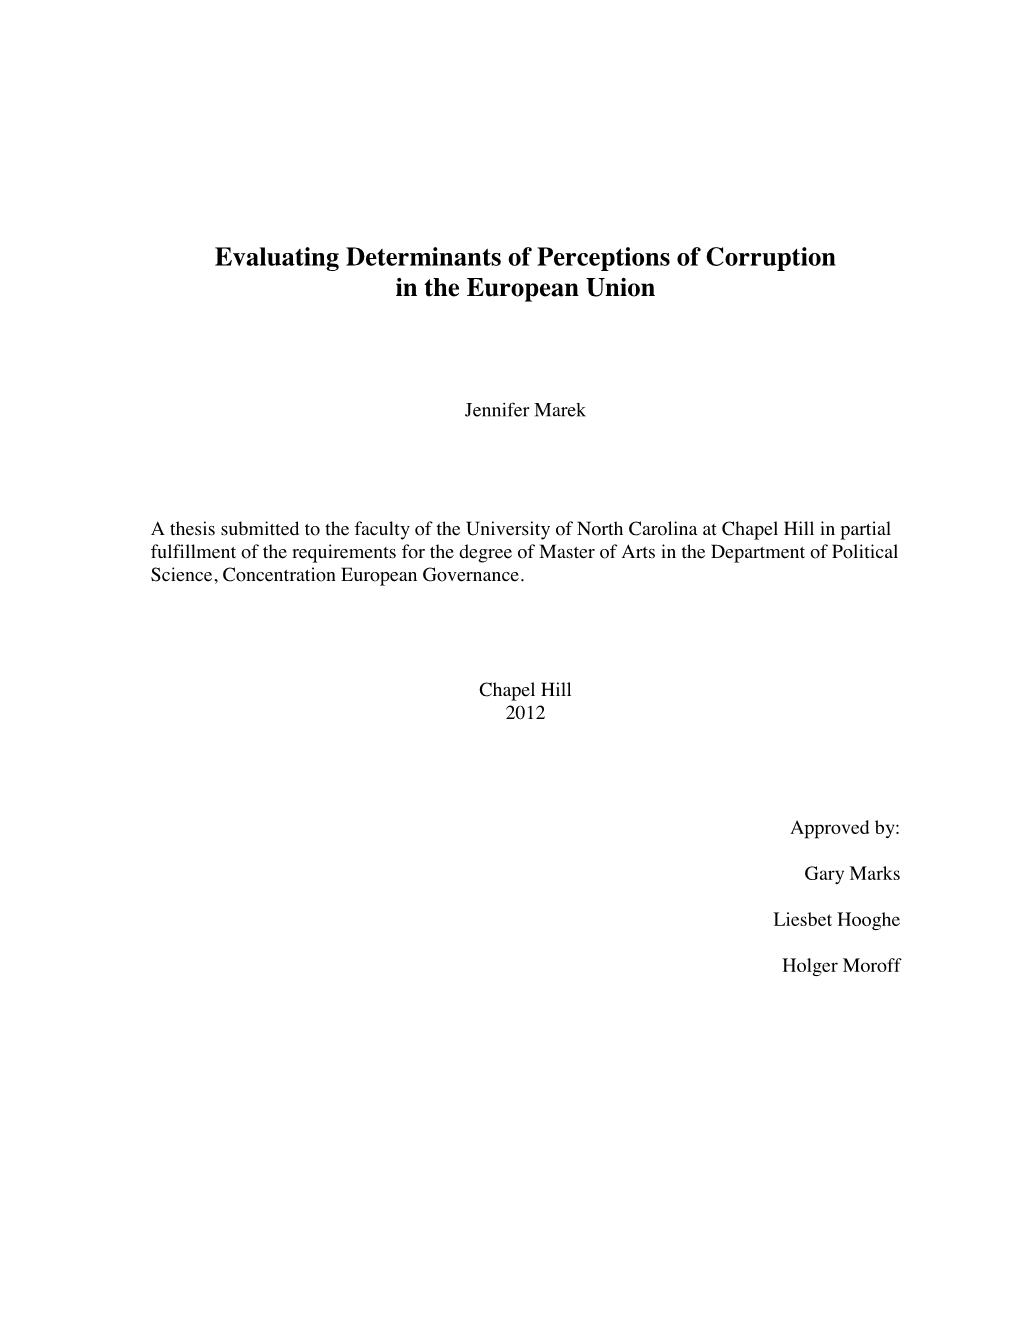 Evaluating Determinants of Perceptions of Corruption in the European Union